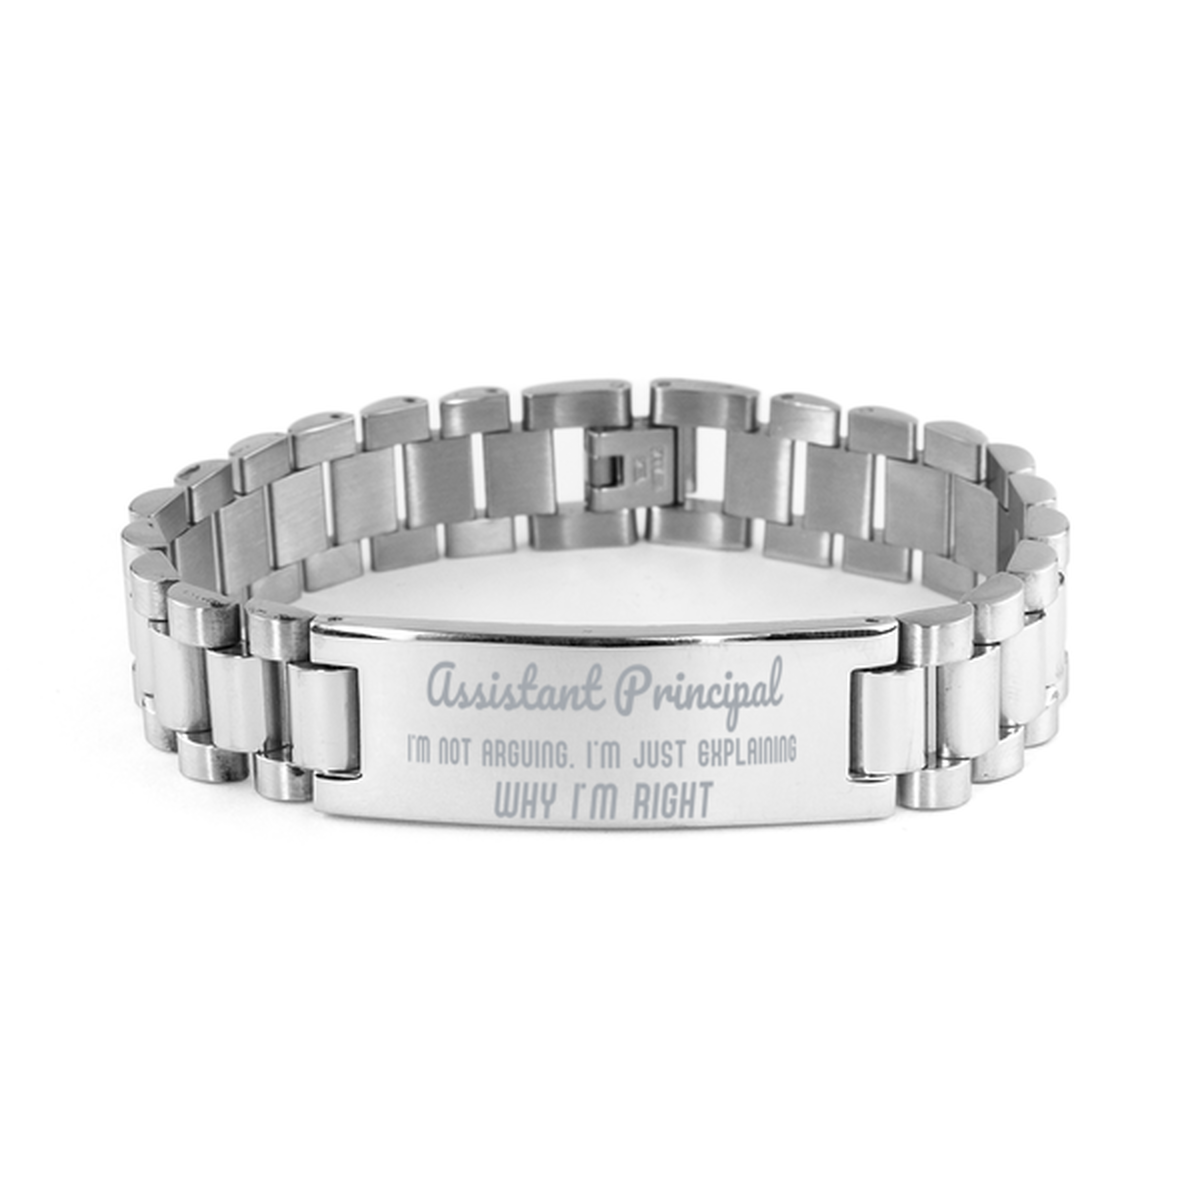 Assistant Principal I'm not Arguing. I'm Just Explaining Why I'm RIGHT Ladder Stainless Steel Bracelet, Graduation Birthday Christmas Assistant Principal Gifts For Assistant Principal Funny Saying Quote Present for Men Women Coworker